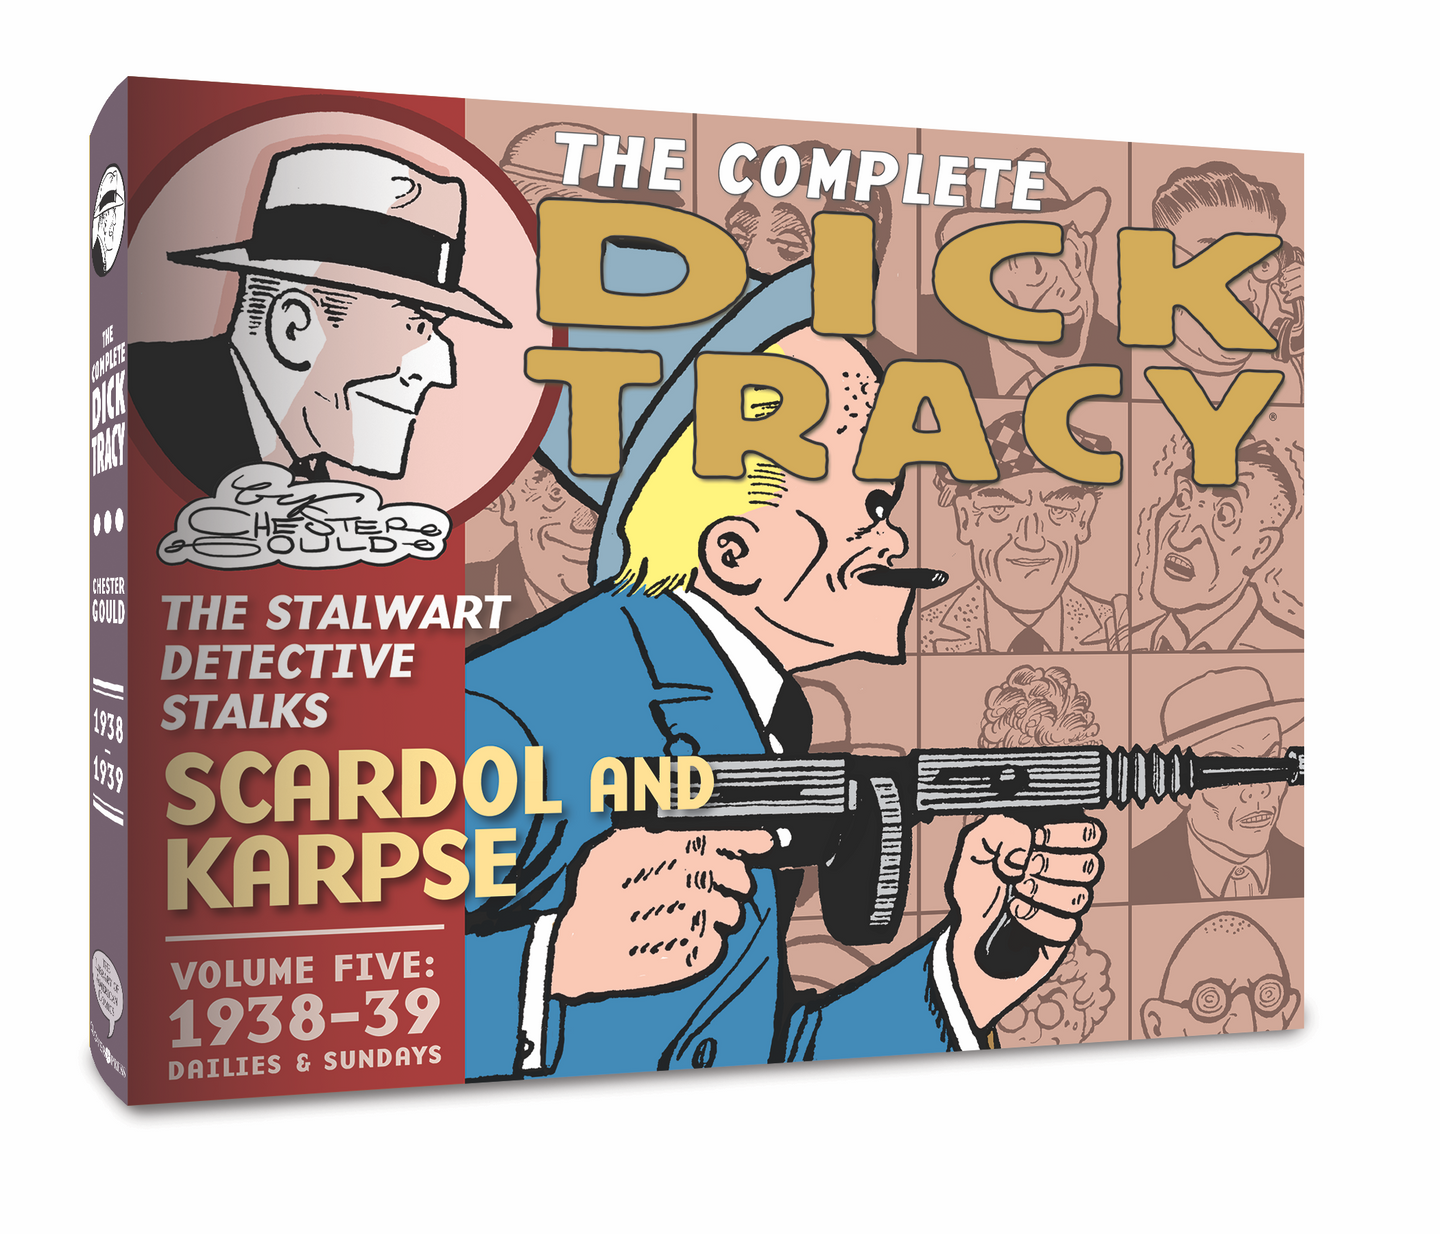 The Complete Dick Tracy Vol. 5